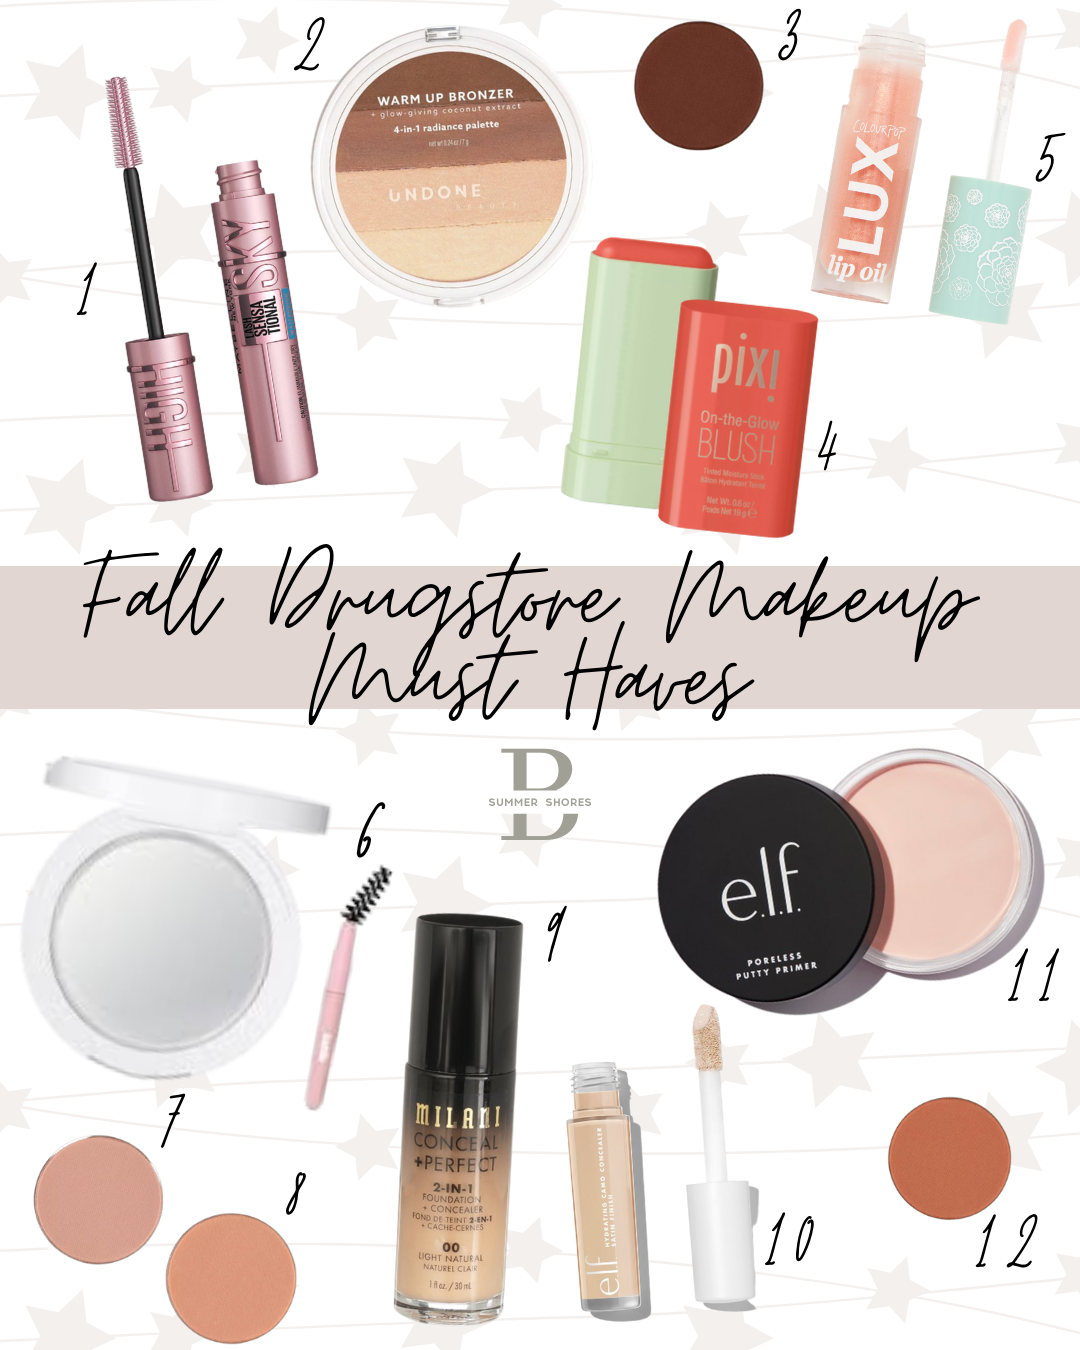 Fall Drugstore Must Haves - Summer Shores